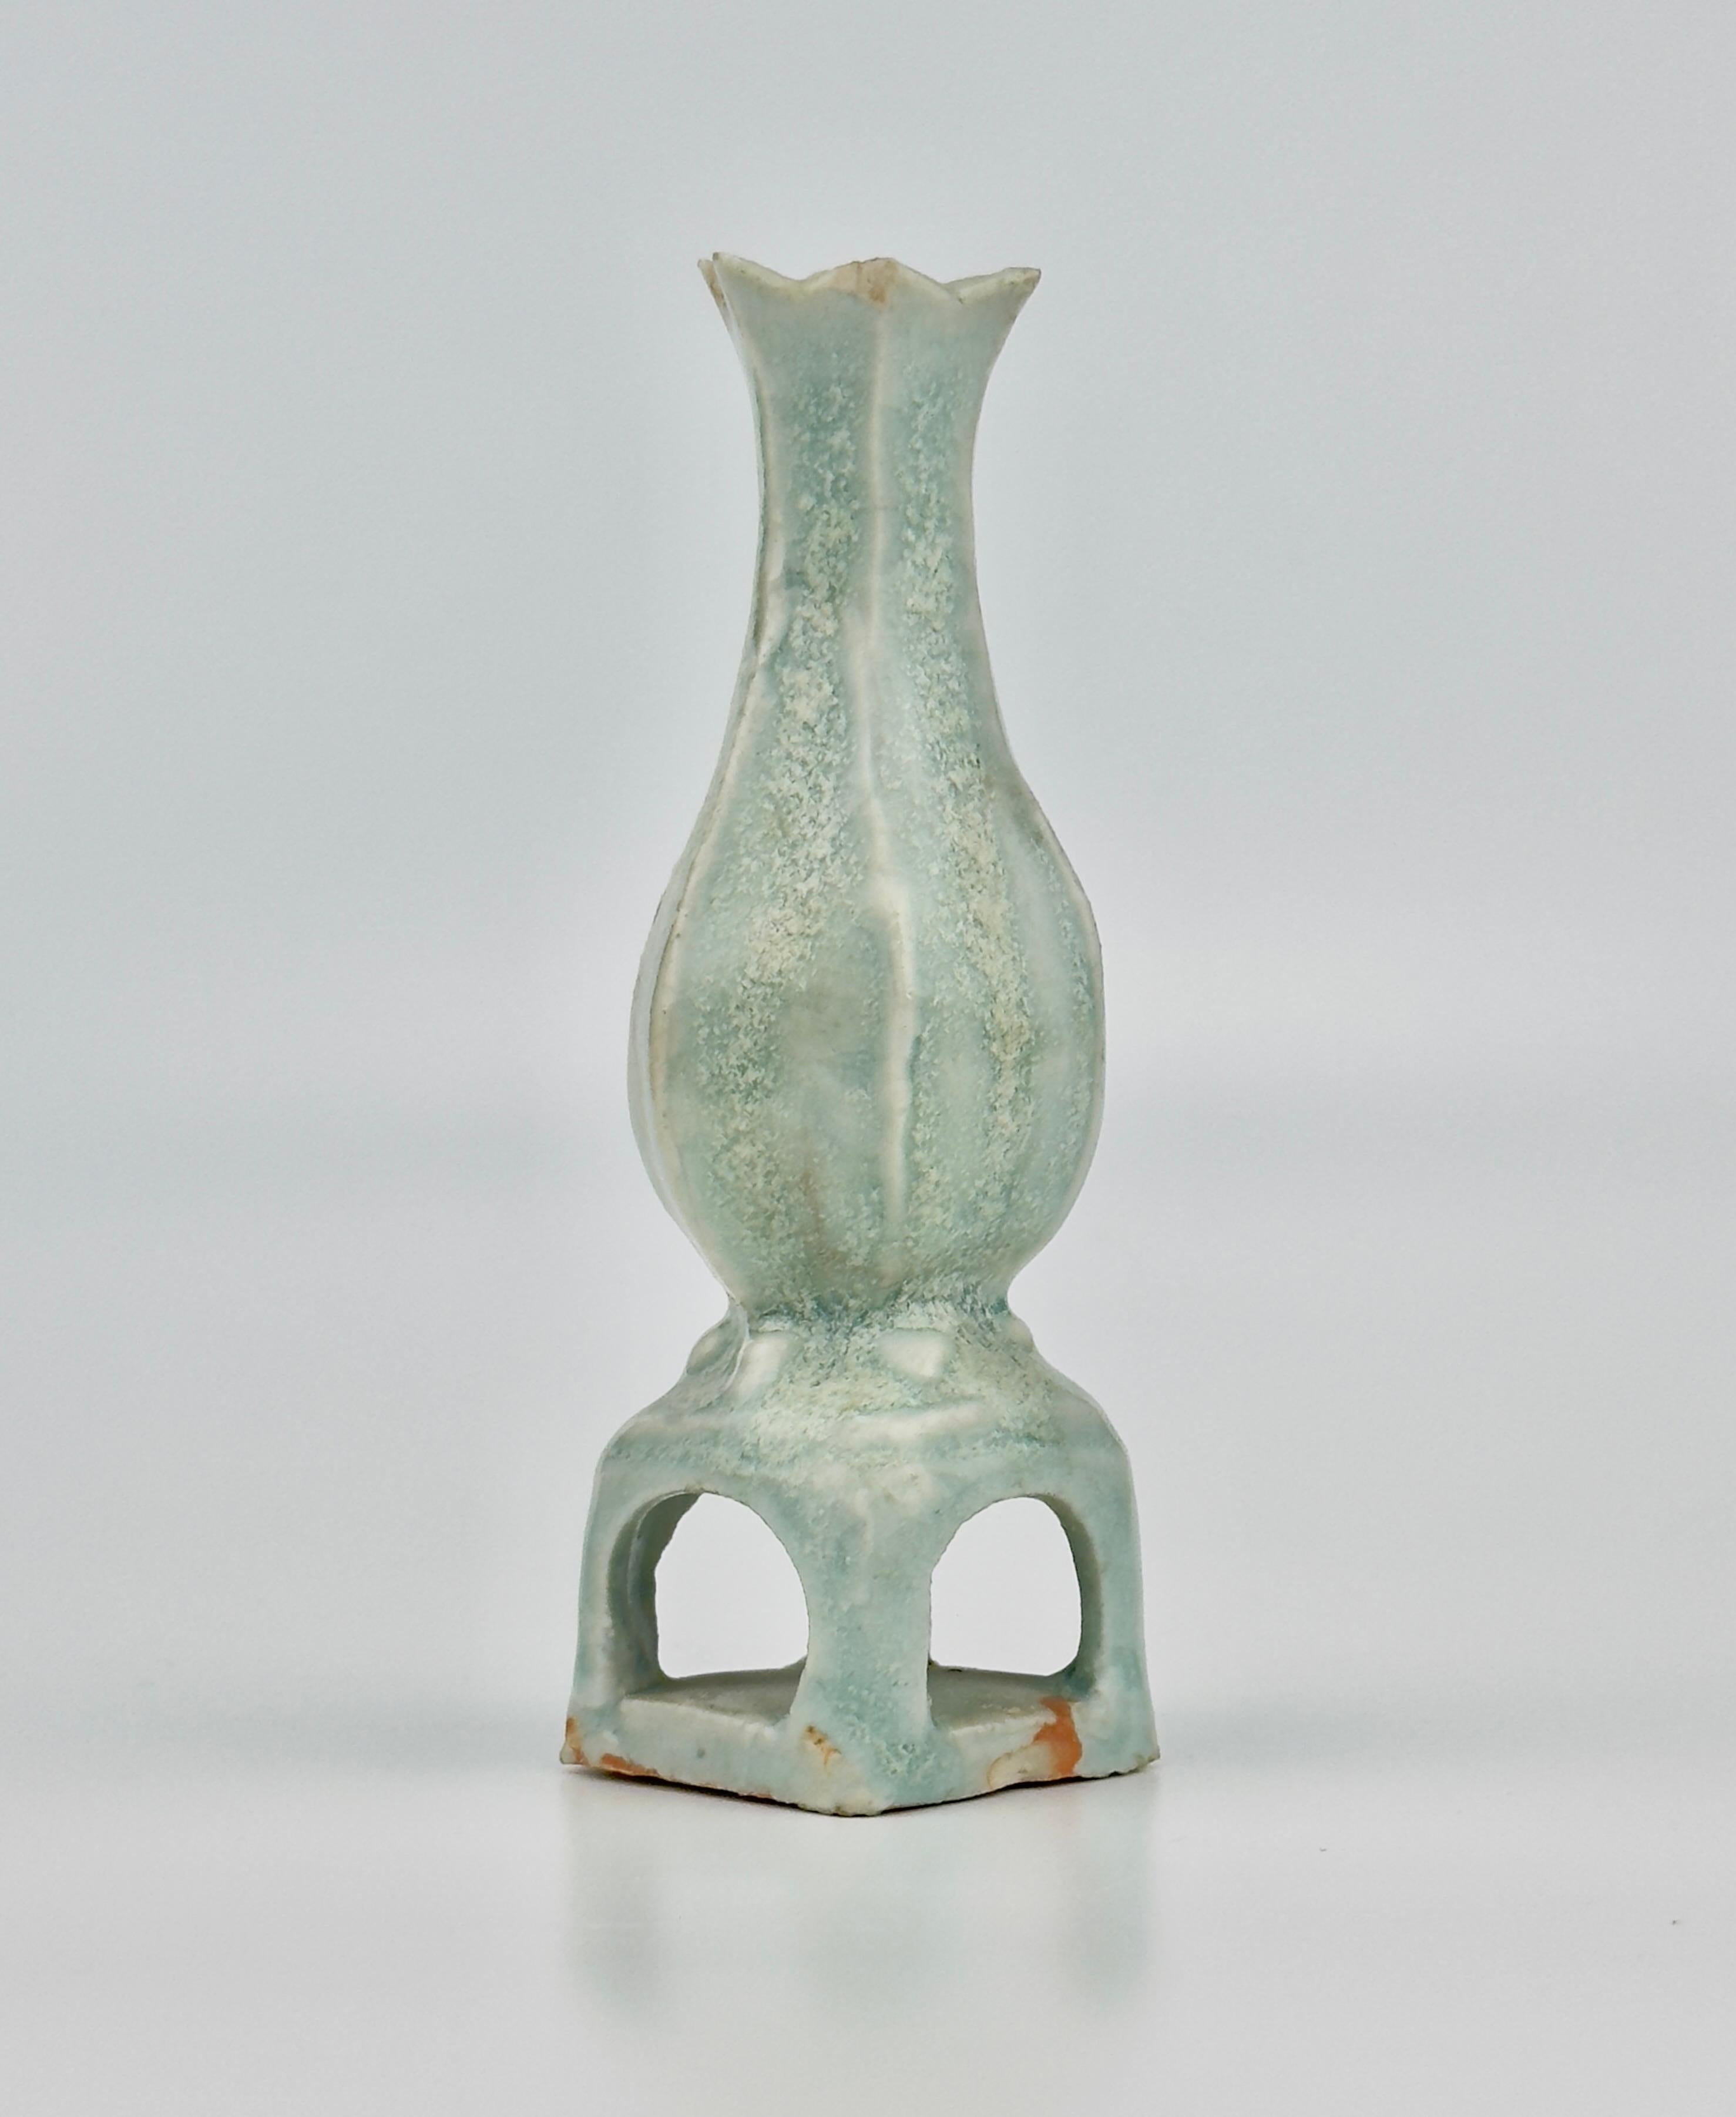 This exquisite piece is a Qingbai ware from the Song to Yuan dynasty, and it appears to be an excavated artifact given its earthy encrustations, suggesting it has rested in the ground for a lengthy period. Despite this, the piece retains its